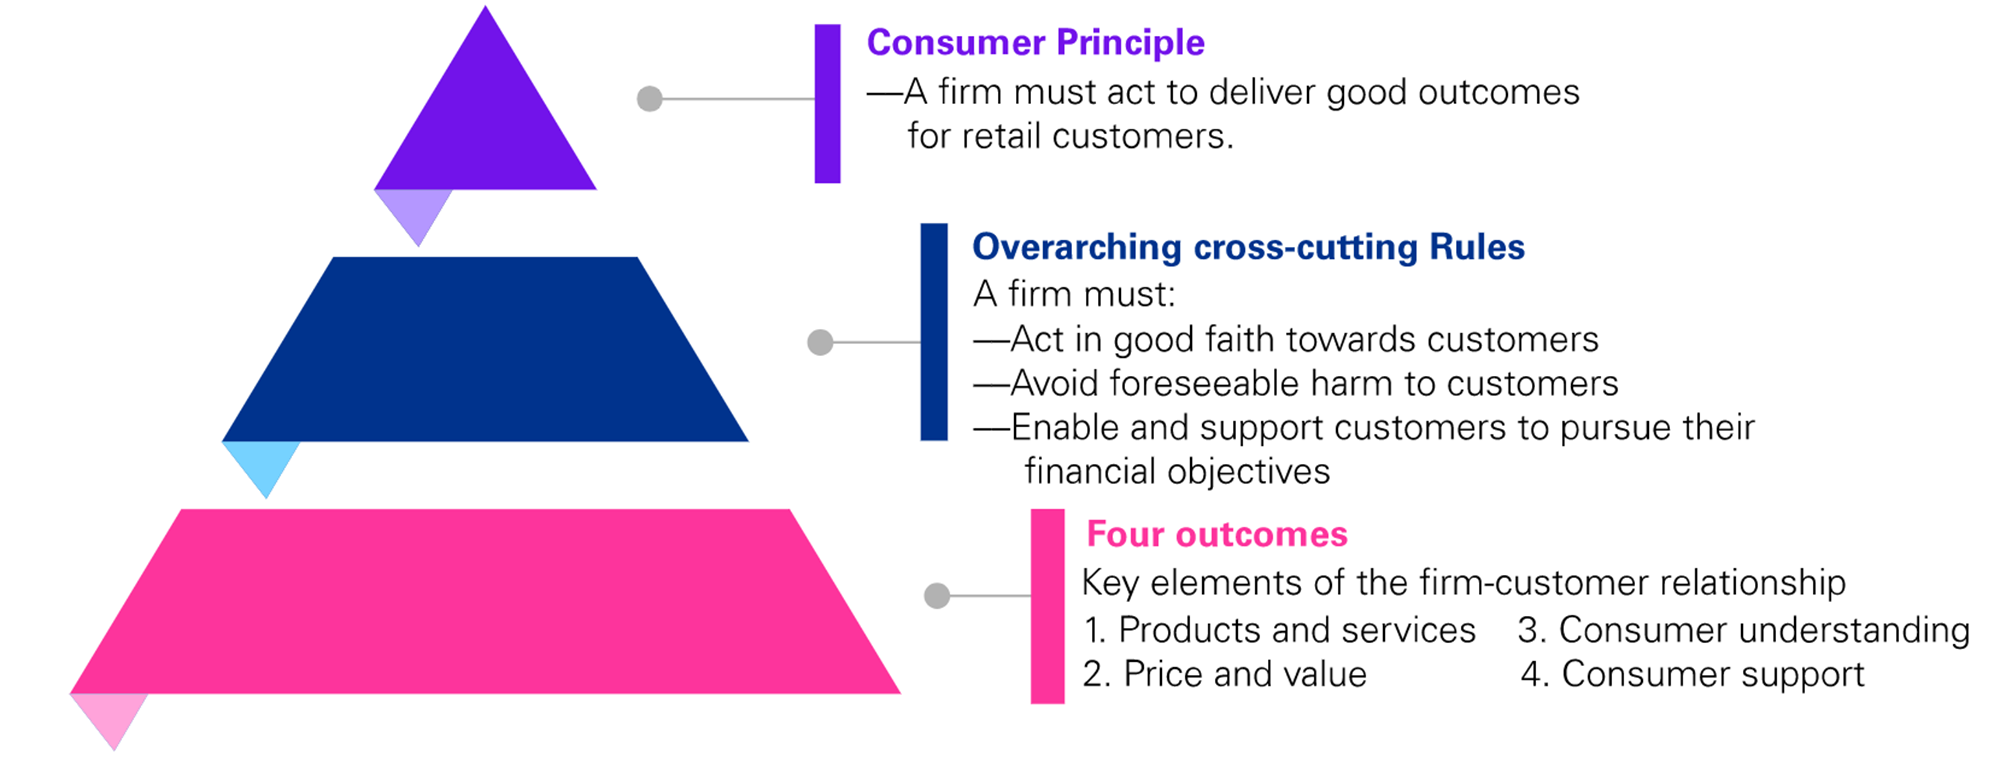 Visual representation of the Consumer Duty of Care as a pyramid. It shows the Consumer Principle at the top with the three cross cutting rules in the middle and then the four outcomes at the bottom.